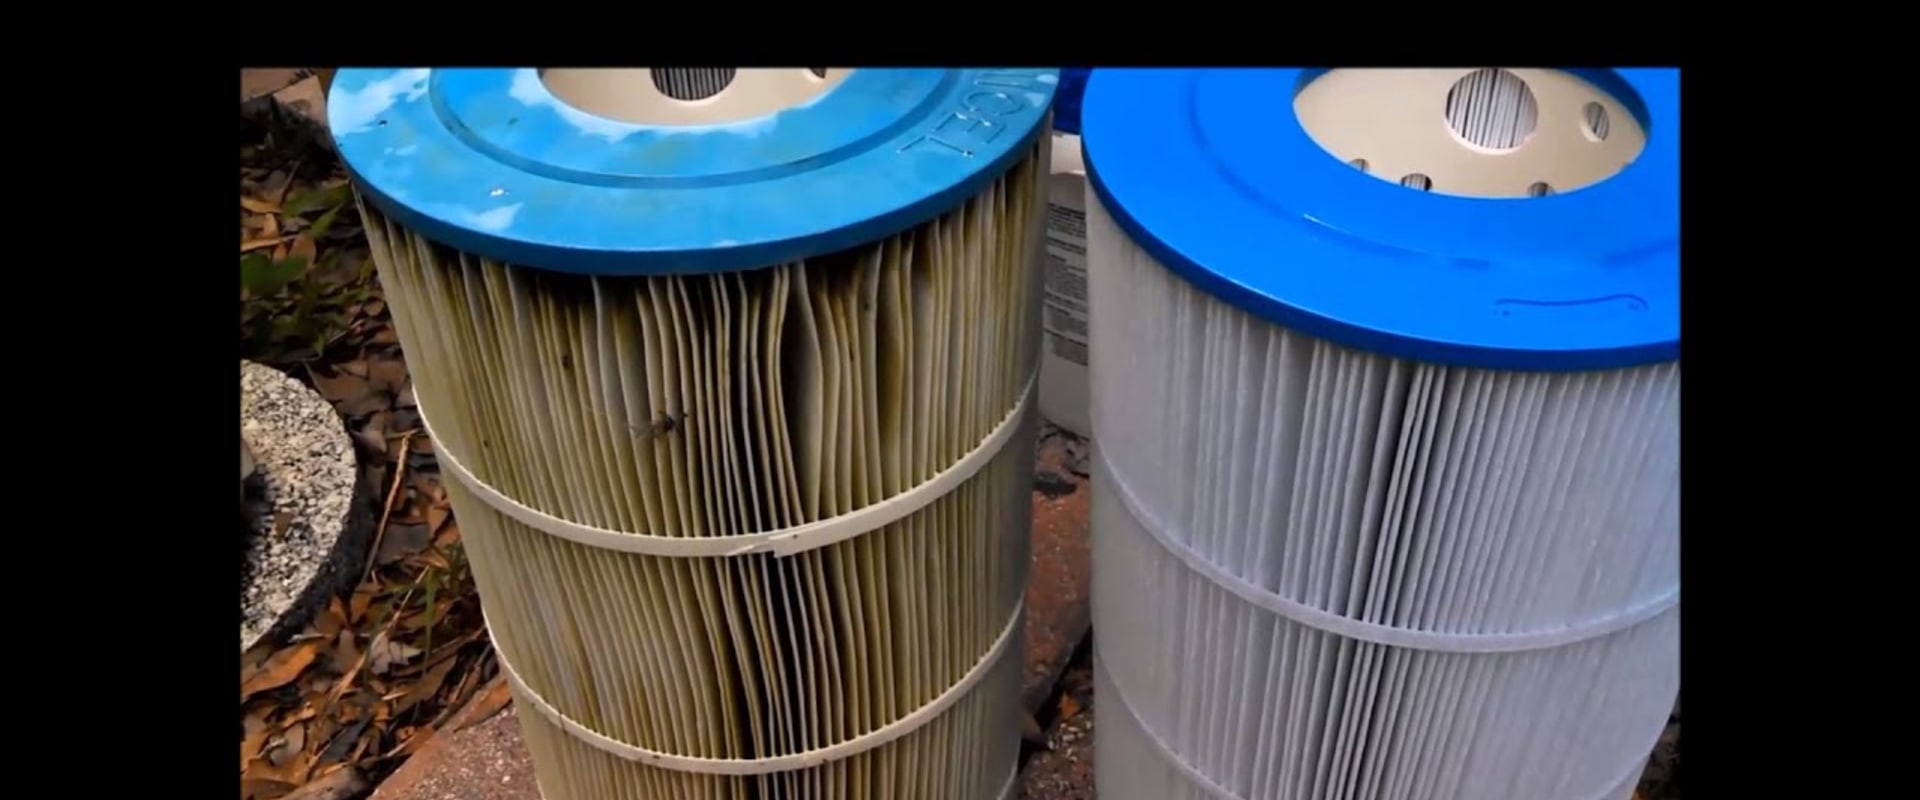 Installing a New Filter Cartridge Before Opening a Swimming Pool